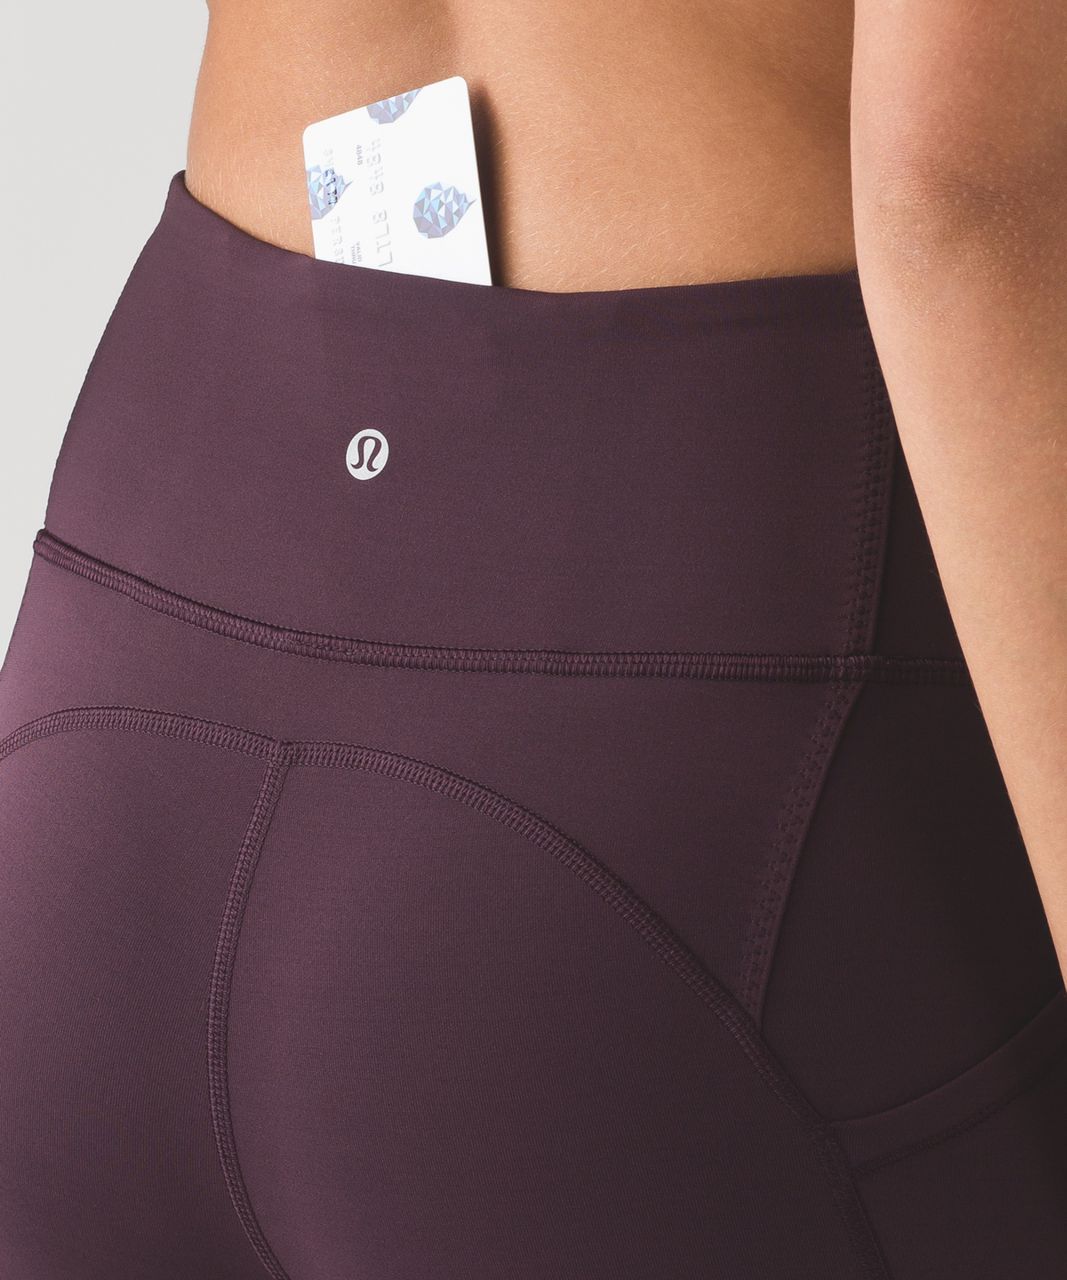 Lululemon All The Right Places Crop II *23" - Black Cherry